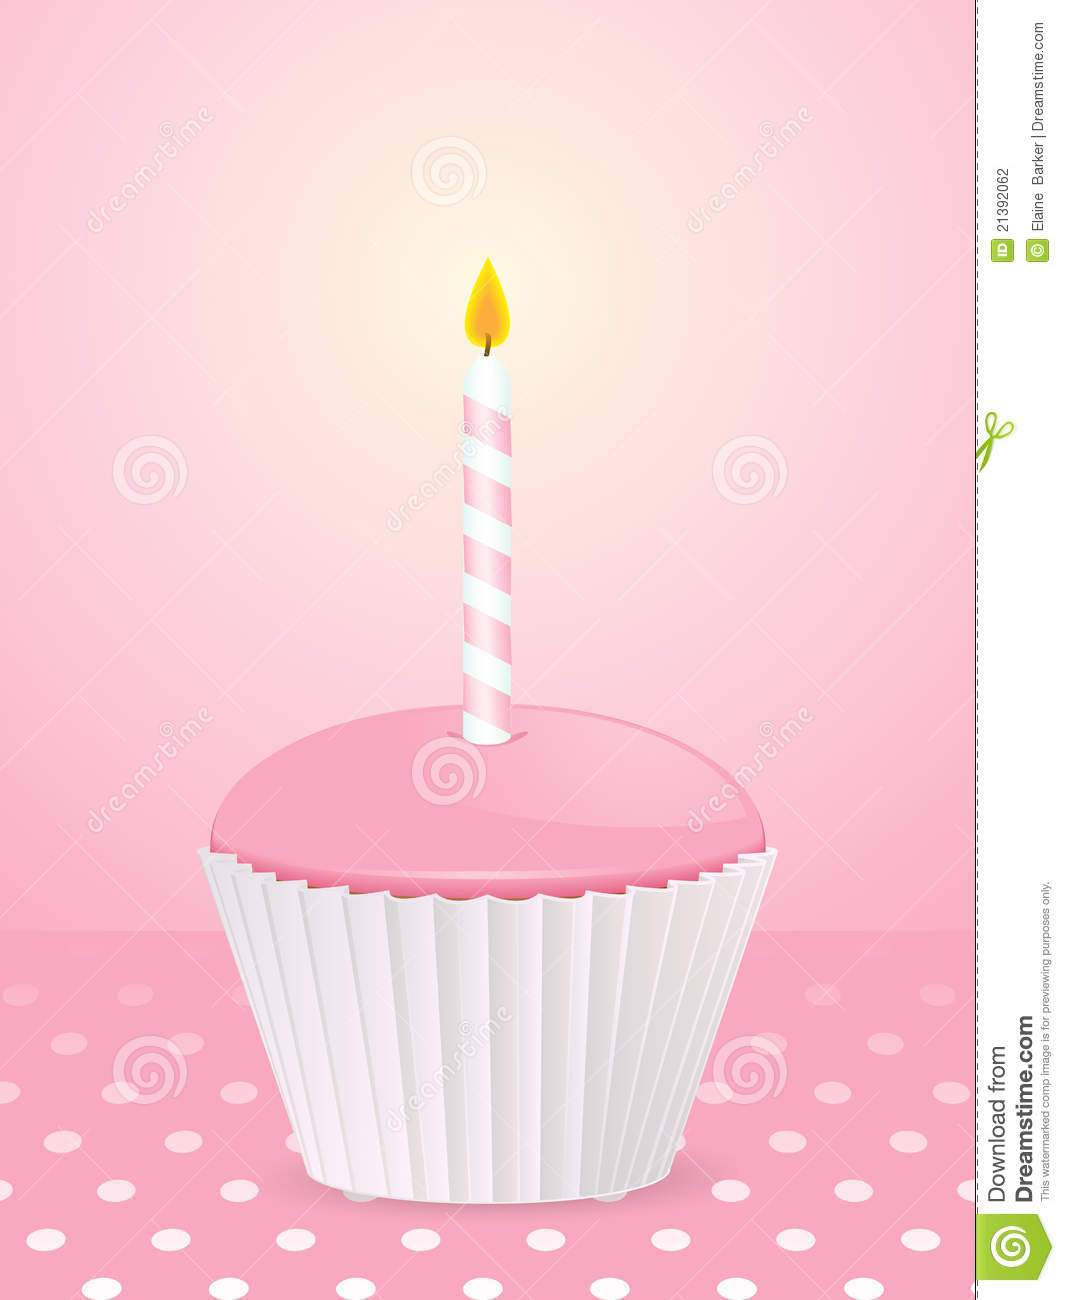 Pink Cupcake With Candle On A Pink Polka Dot Background